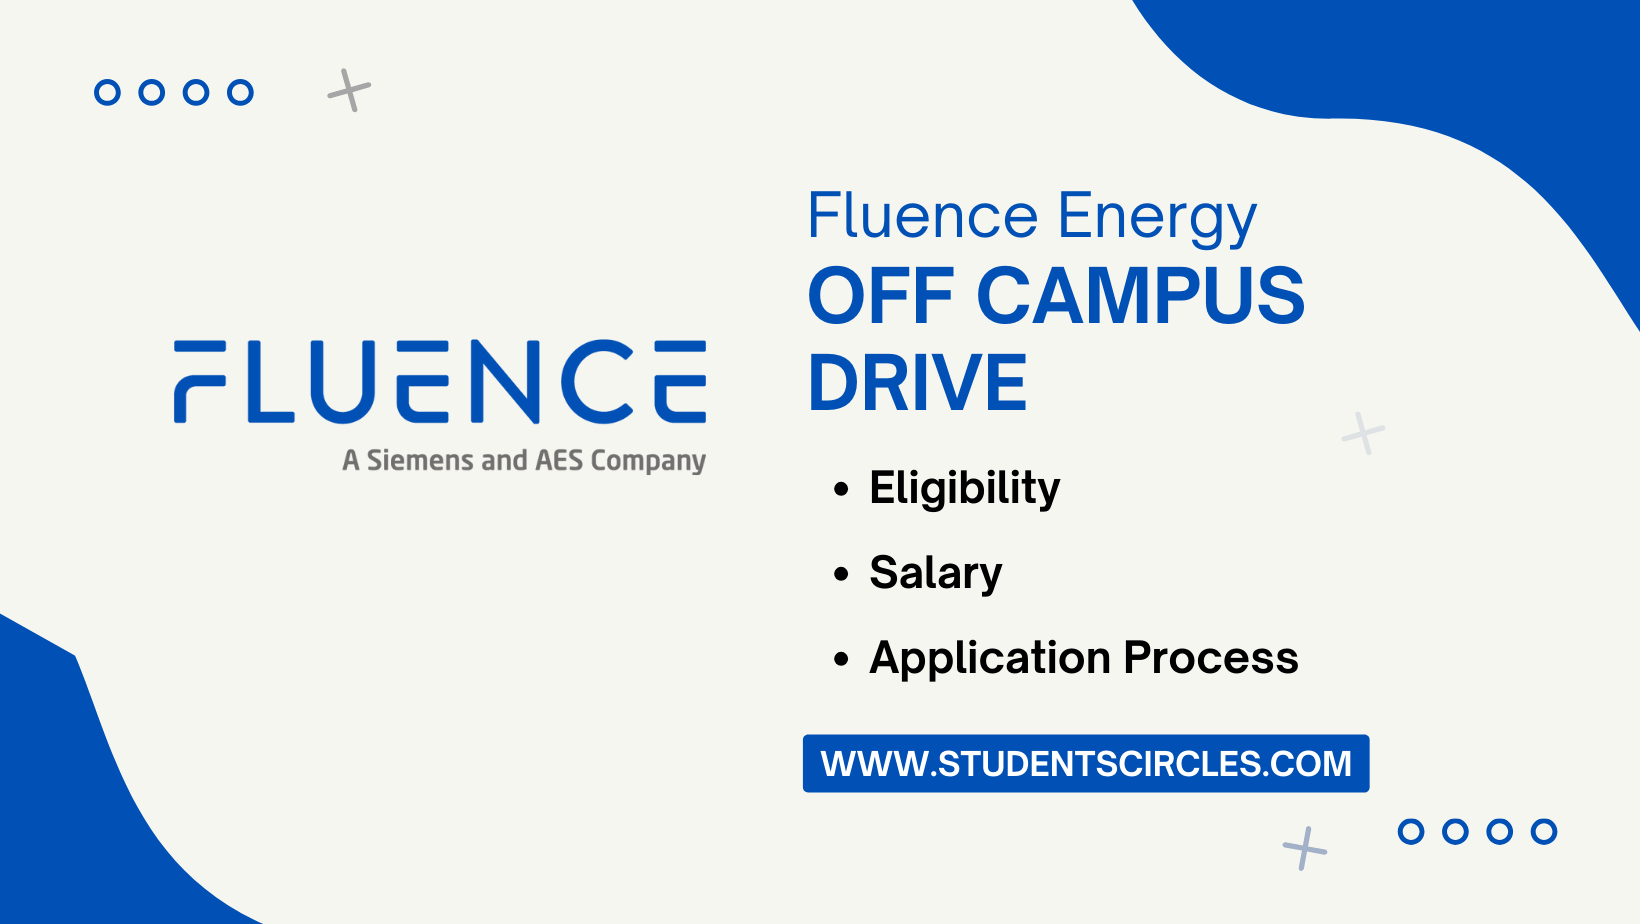 Fluence Energy Off Campus Drive